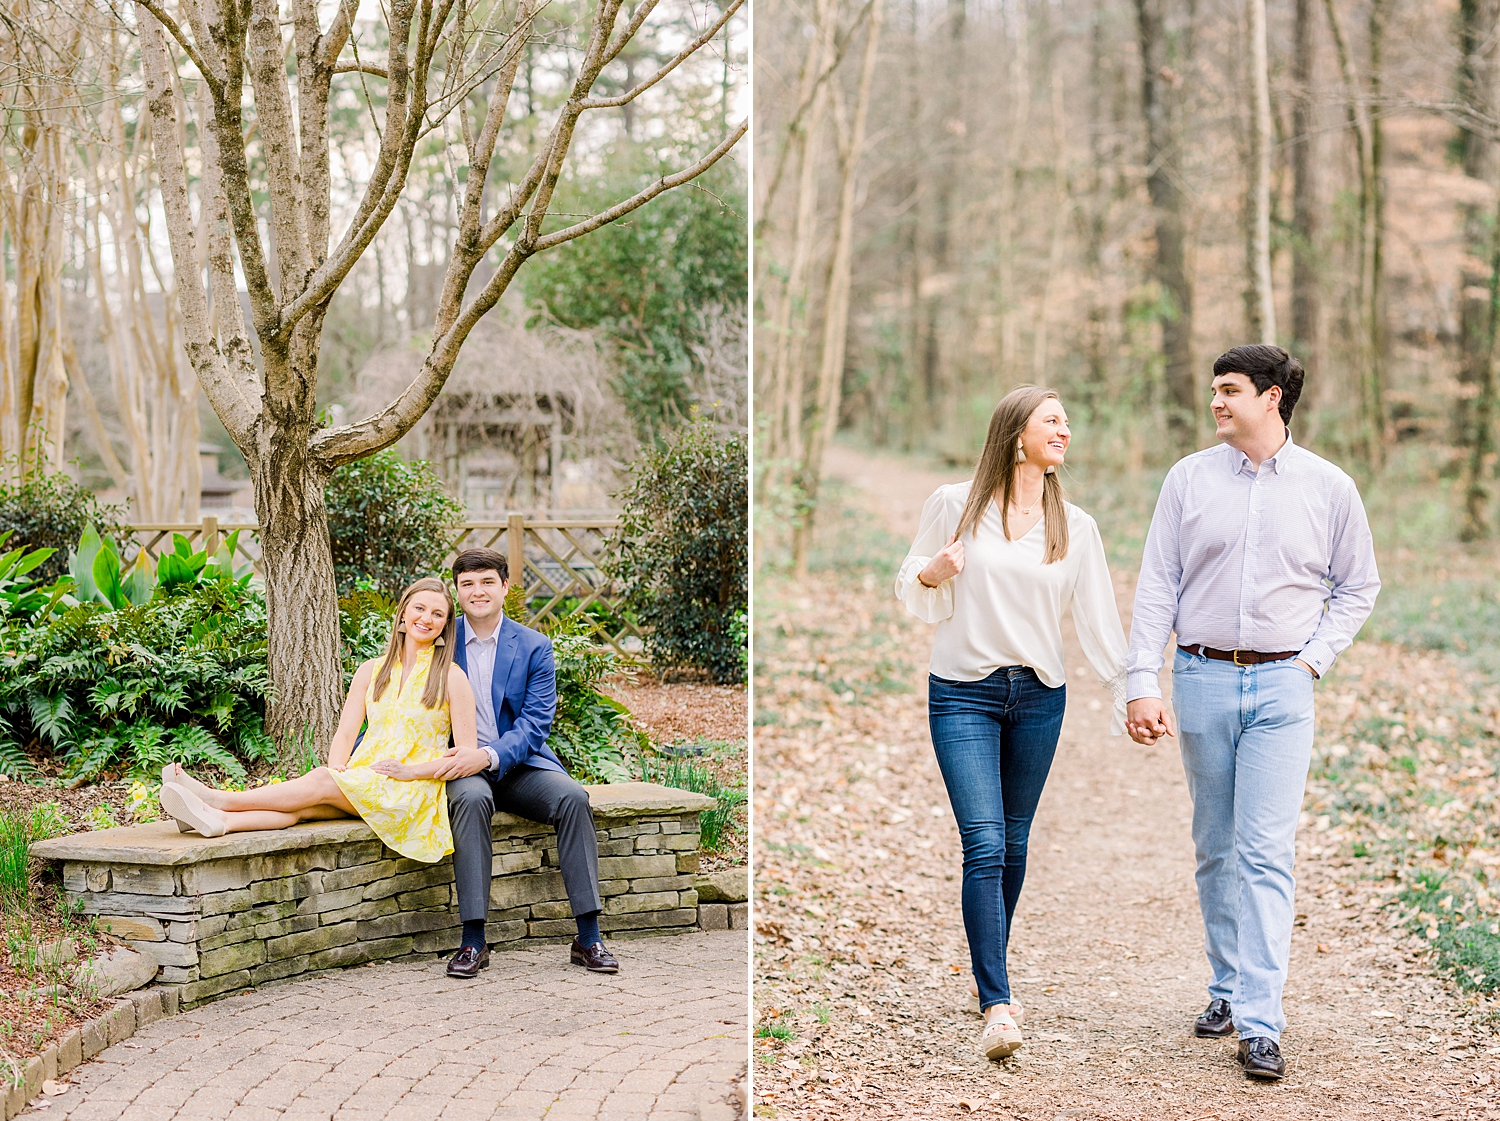 couple walking in forest for engagement photos -A Year of Engagements: 2021